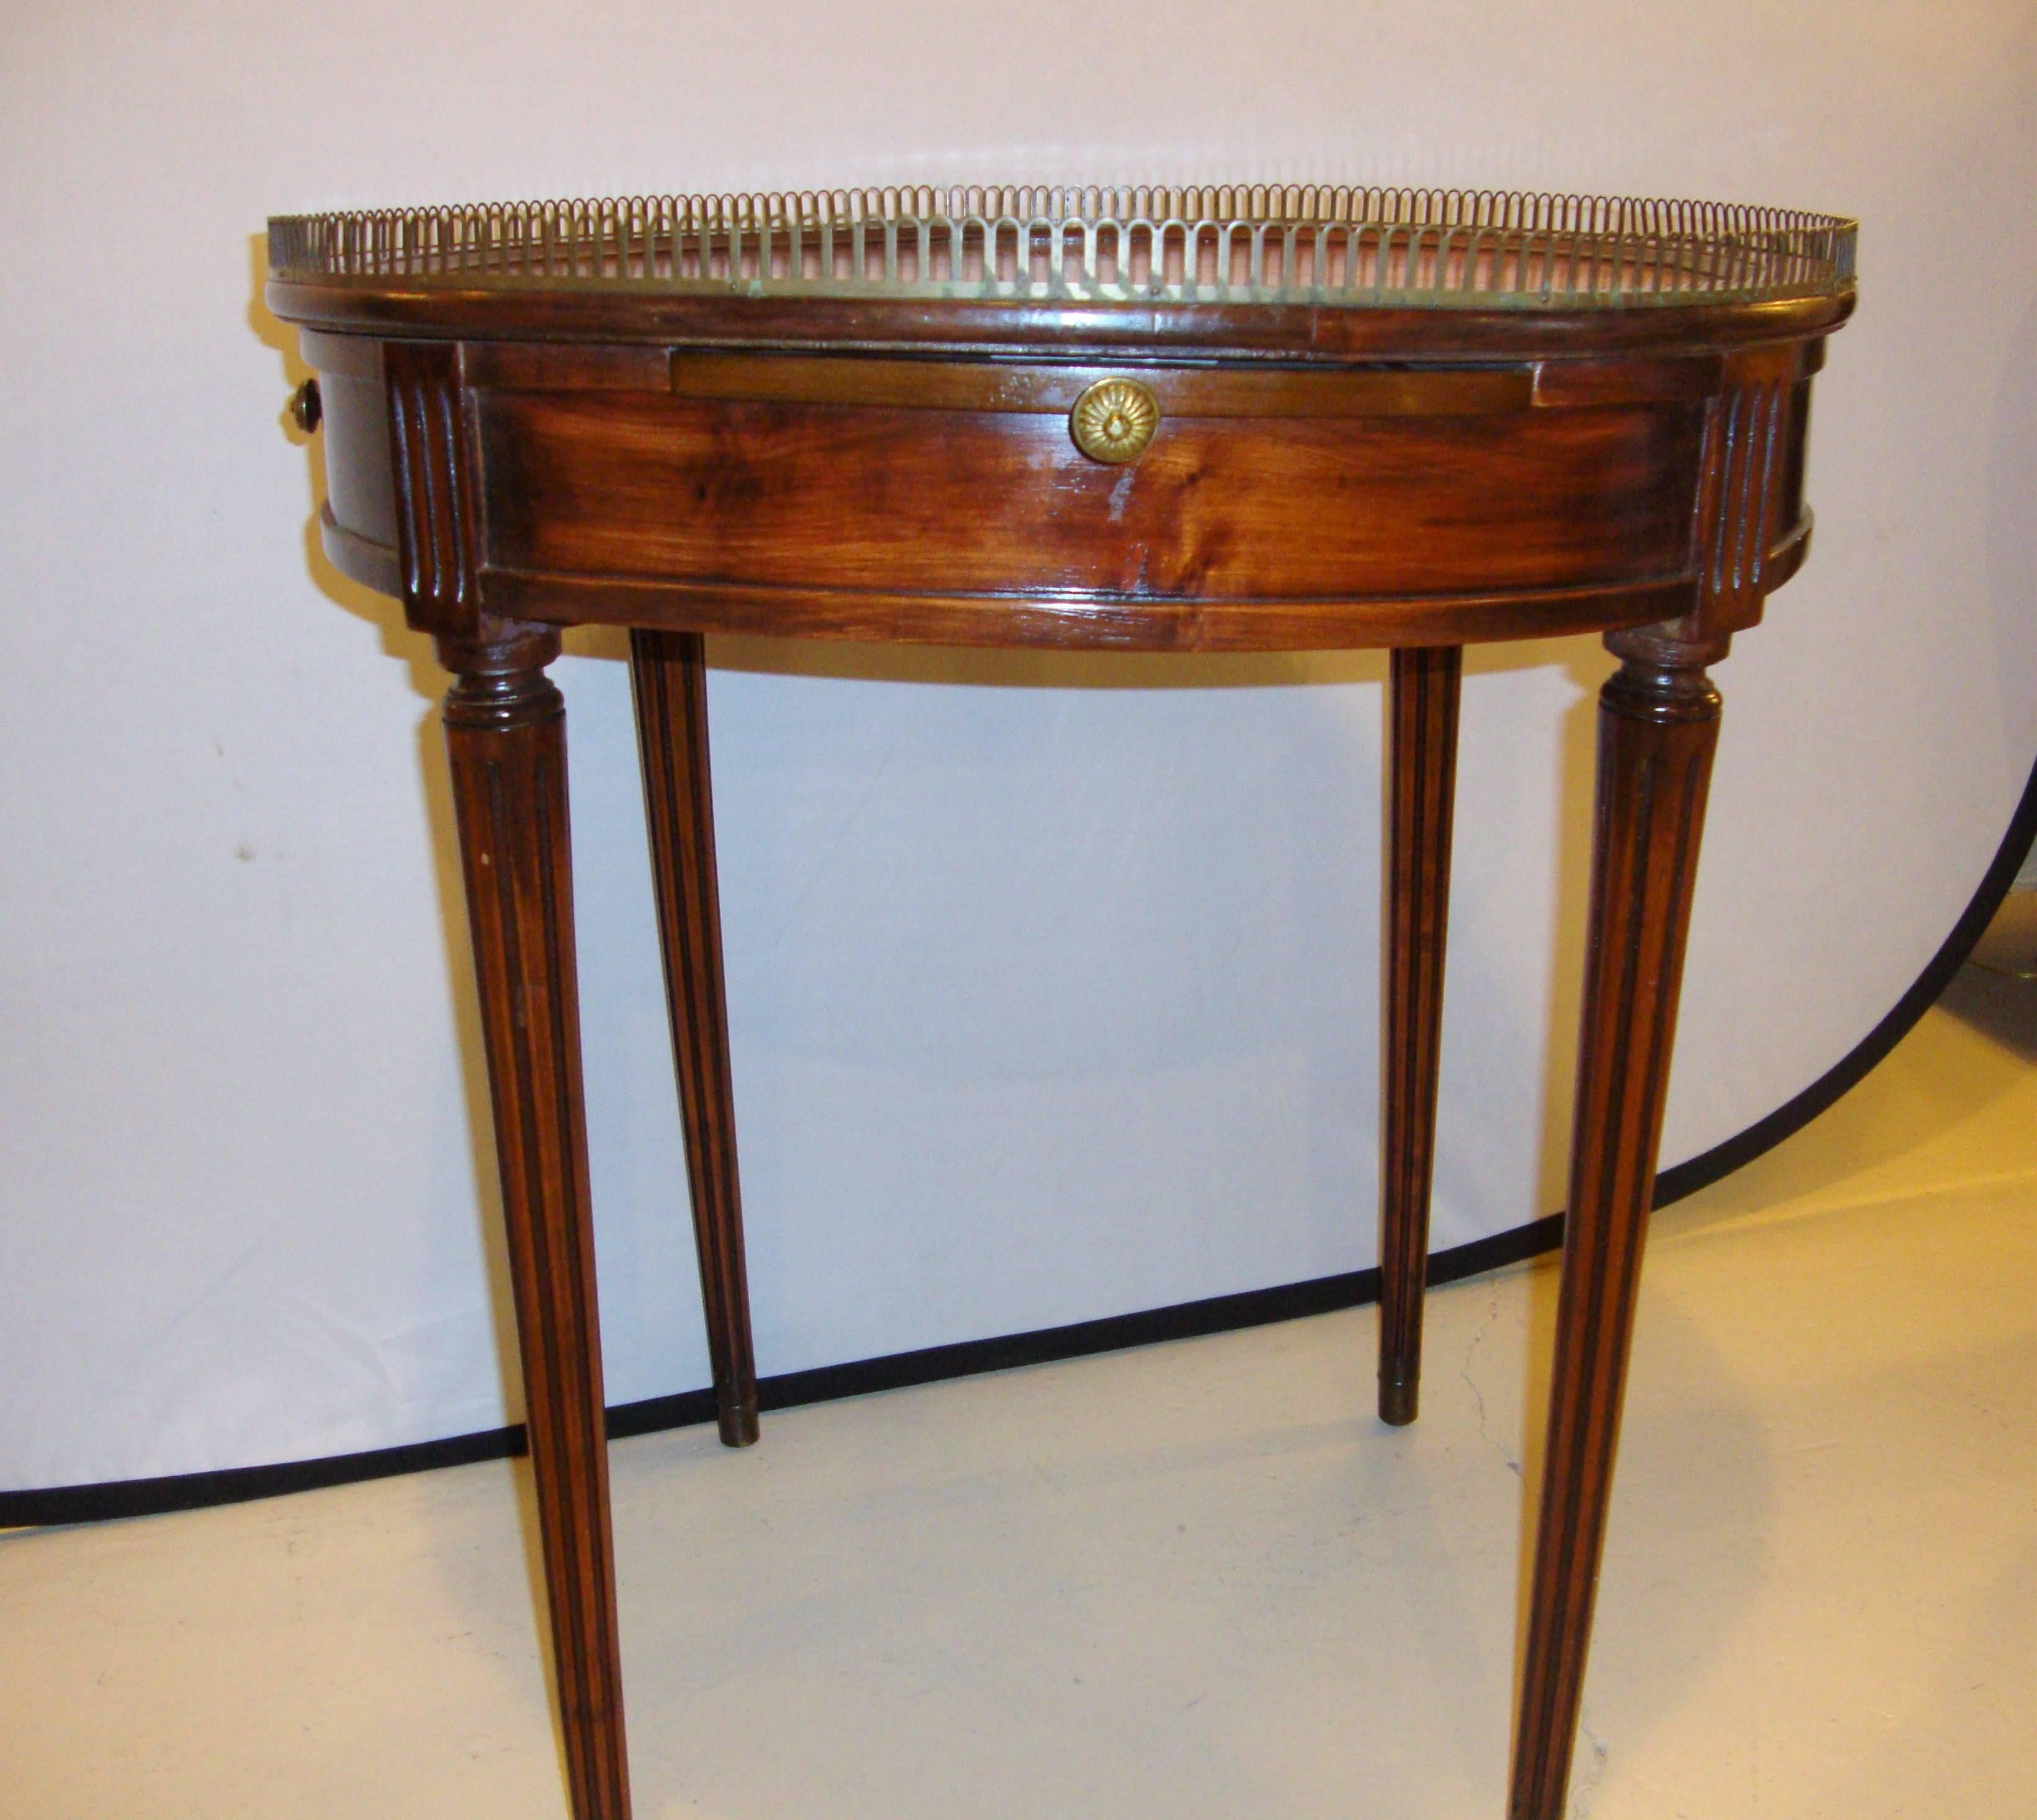 Bronze galleries mahogany circular center end table. Length of pull-out sides = 8 inches.